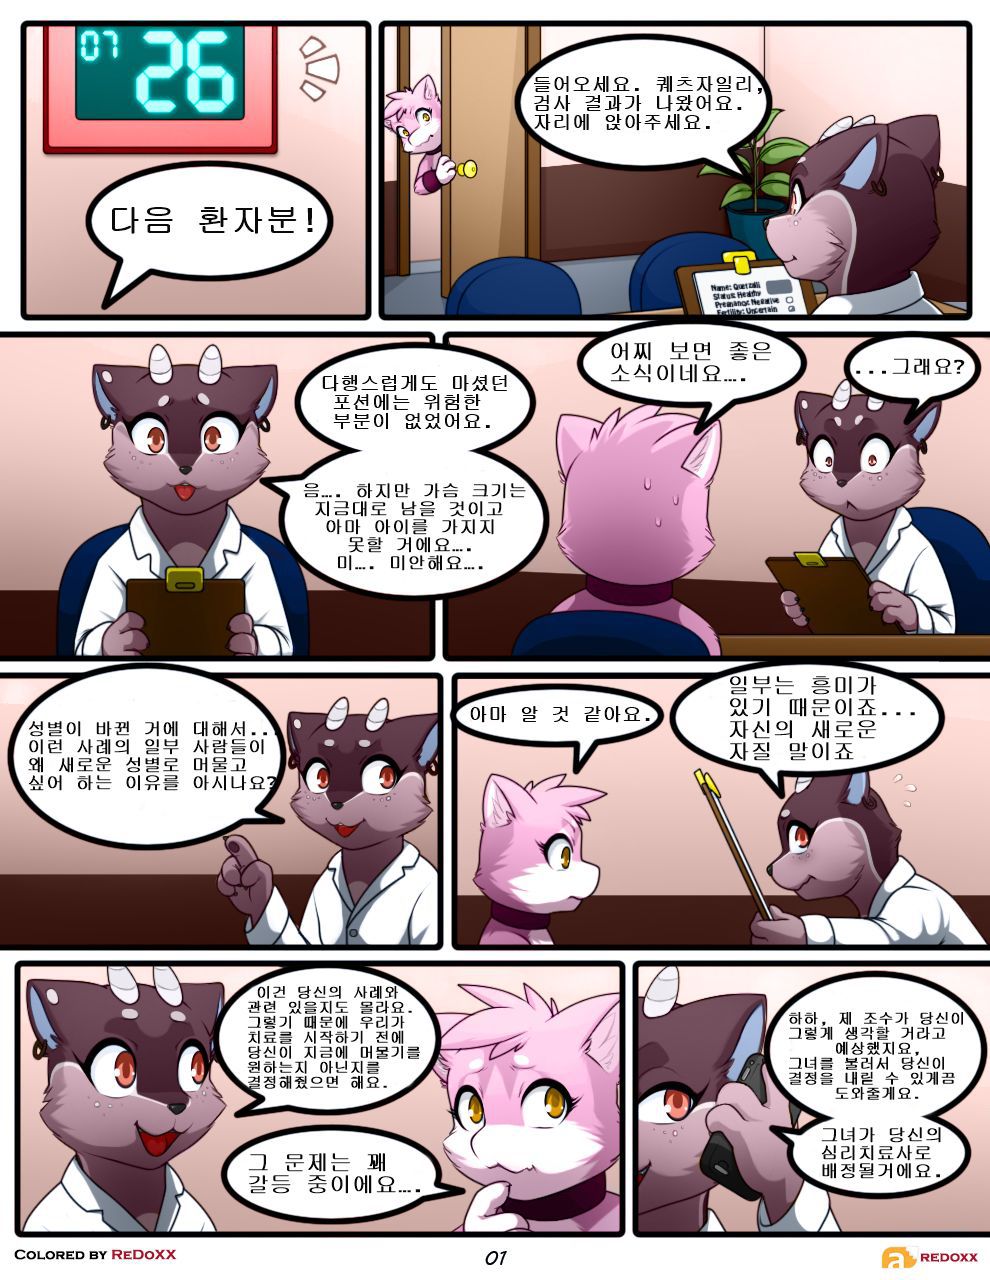 [Darkmirage] Change of Rules 2: Inner Treatment [Colorized by ReDoXX] (ongoing)[Korean] 3